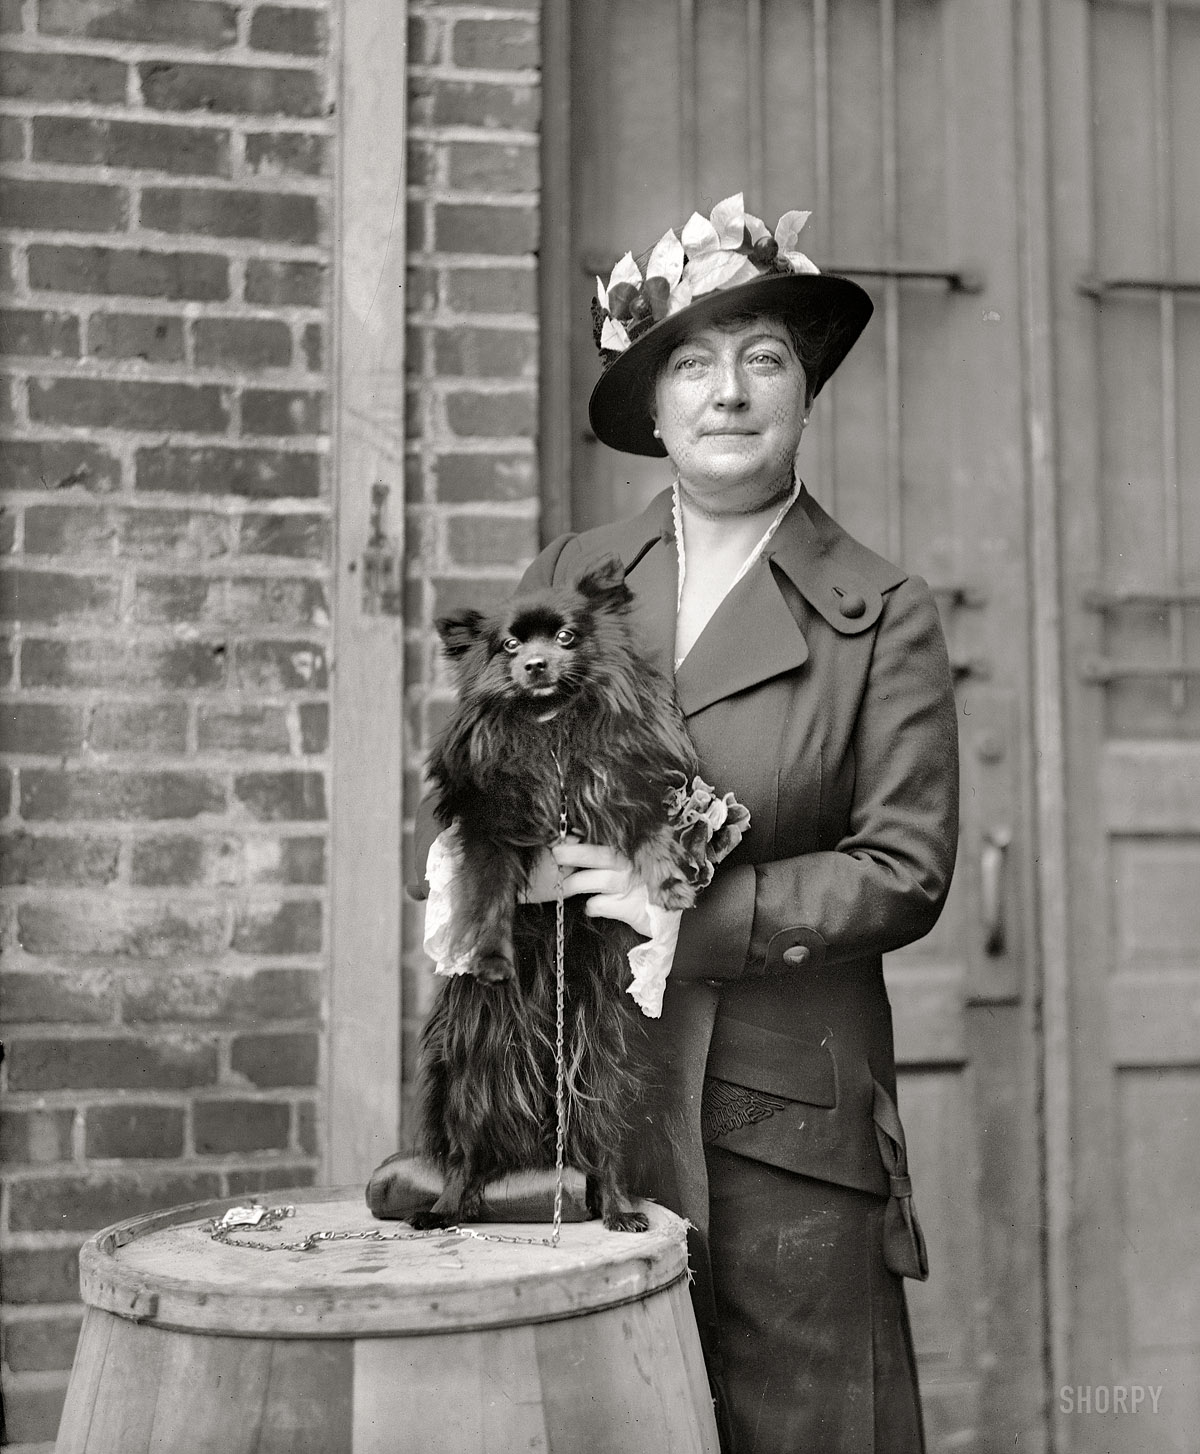 1915. "Dog show. Mrs. Henry C. Corbin." Another entry from H&E's series showing matrons, misses and their mutts at the Washington Kennel Club dog show of April 1915. Harris & Ewing Collection glass negative. View full size.